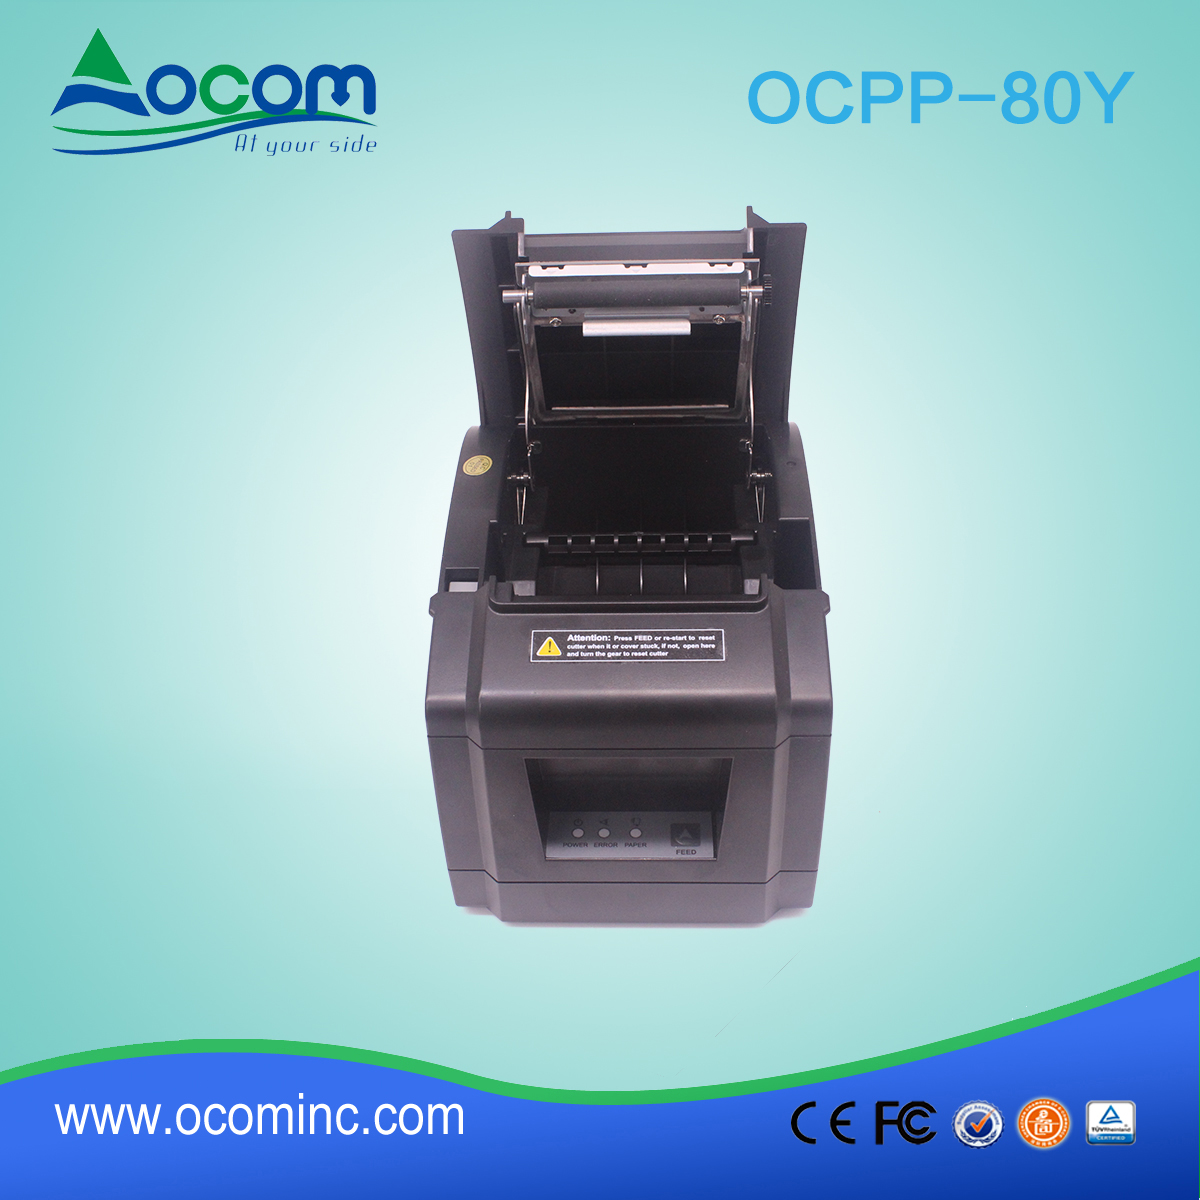 OCPP-80Y-China cheap 80mm thermal printer with auto cutter